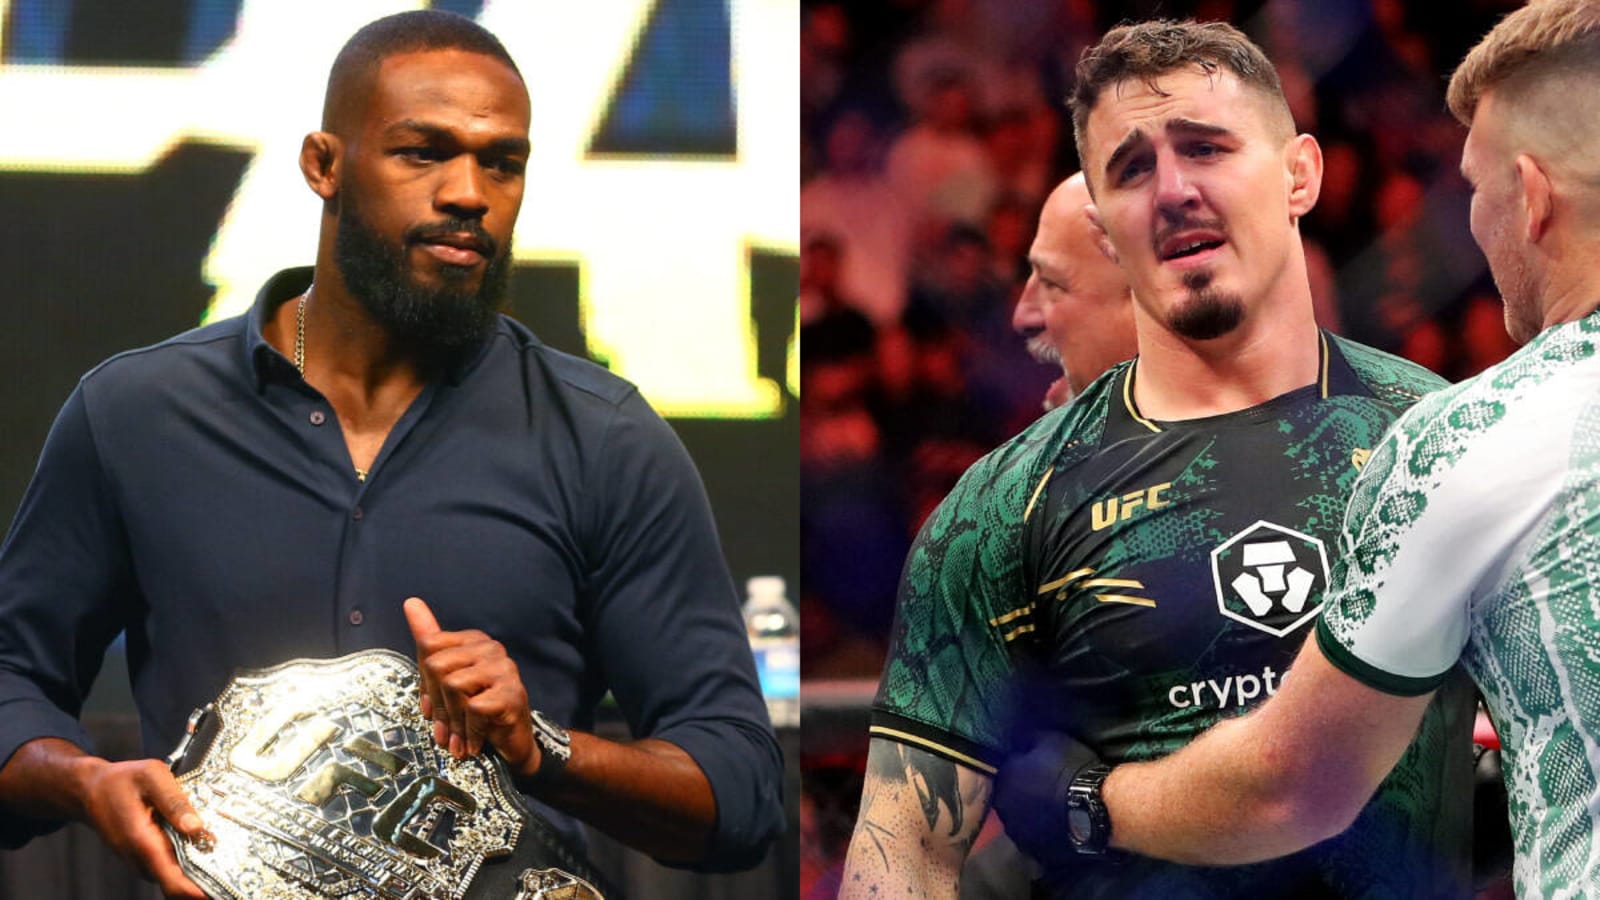 Jon Jones&#39; Training Partner Dismisses Suggestion He Should Fight Tom Aspinall Over Stipe Miocic: &#39;Who Did Aspinall Beat?&#39; (Exclusive)